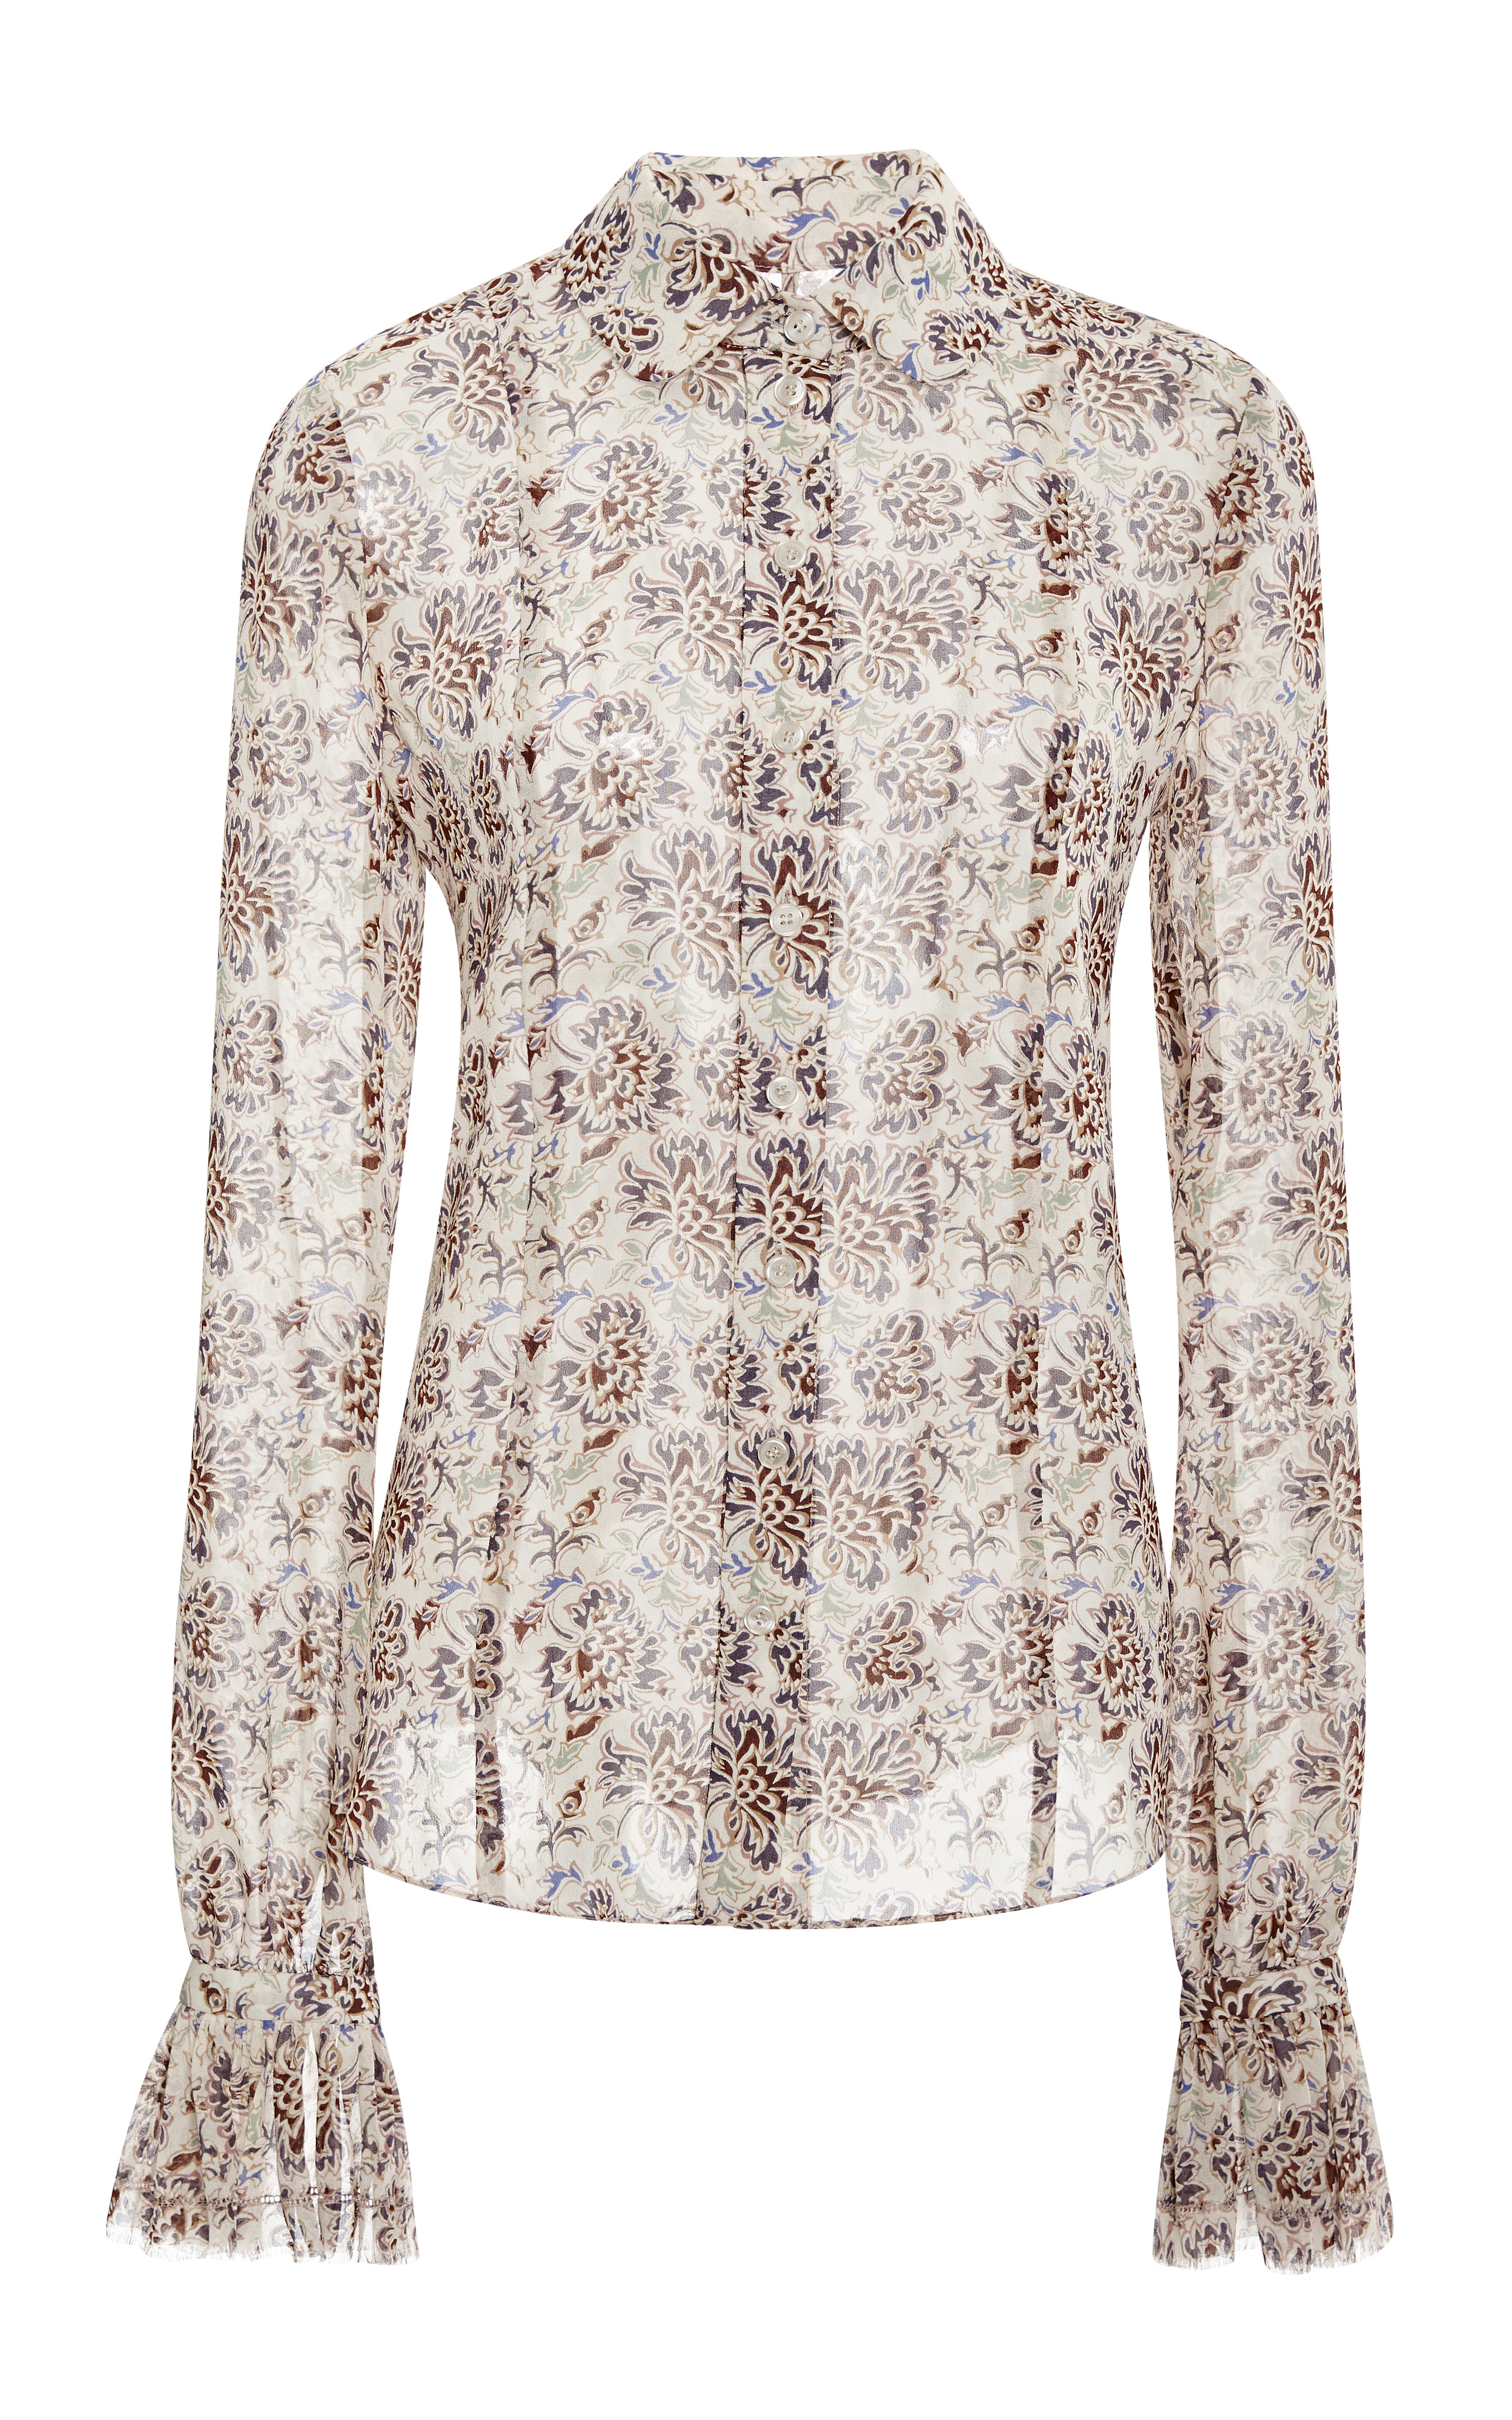 Tory Burch Sherry Shirt in Natural - Lyst